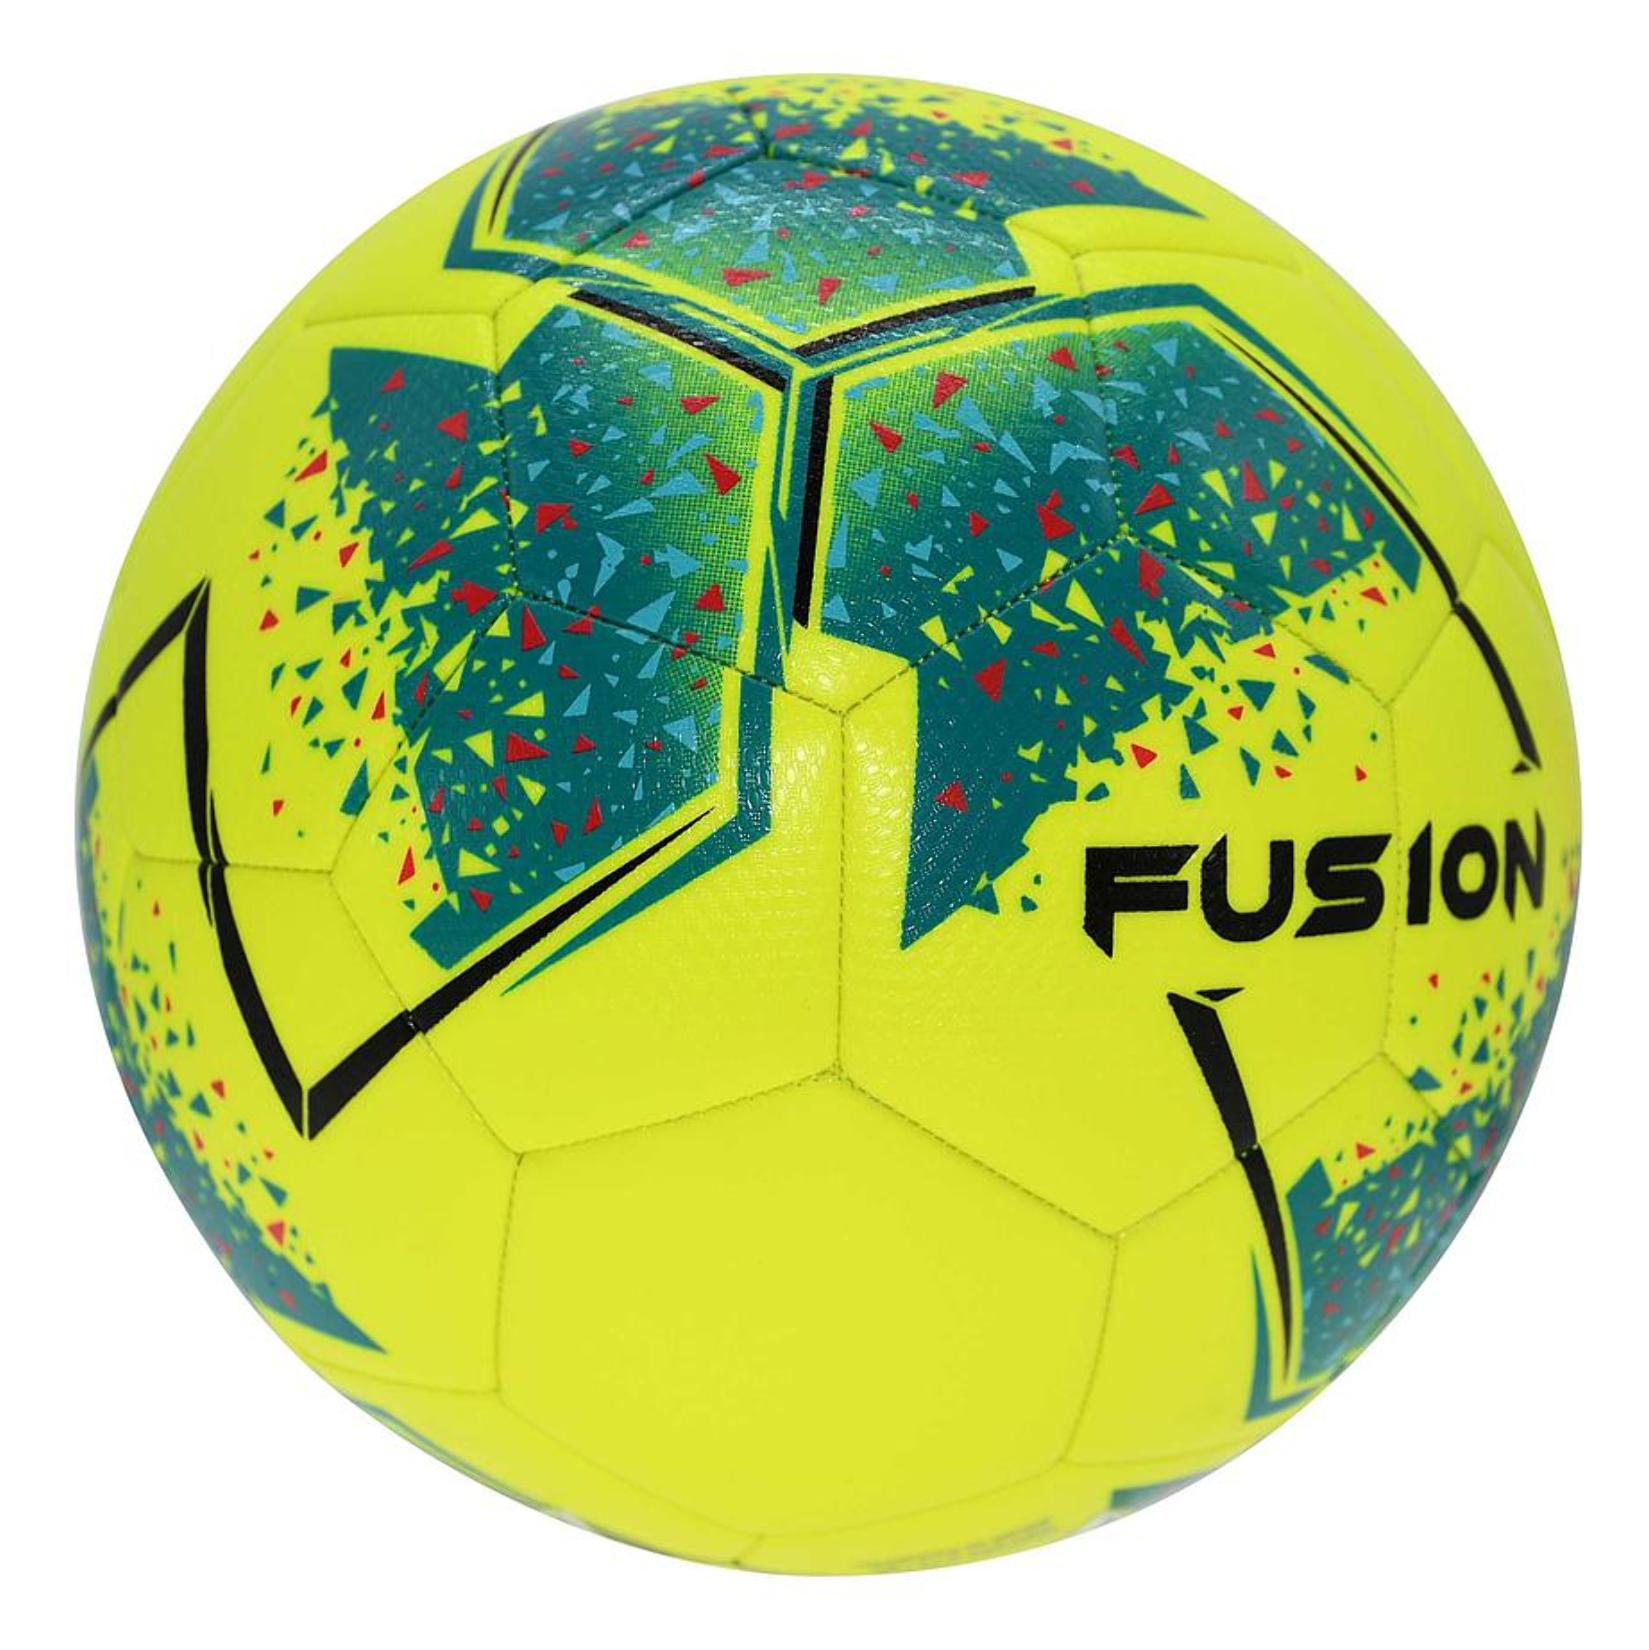 Precision Fusion IMS Training Ball Flou Yellow-Teal-Cyan-Red